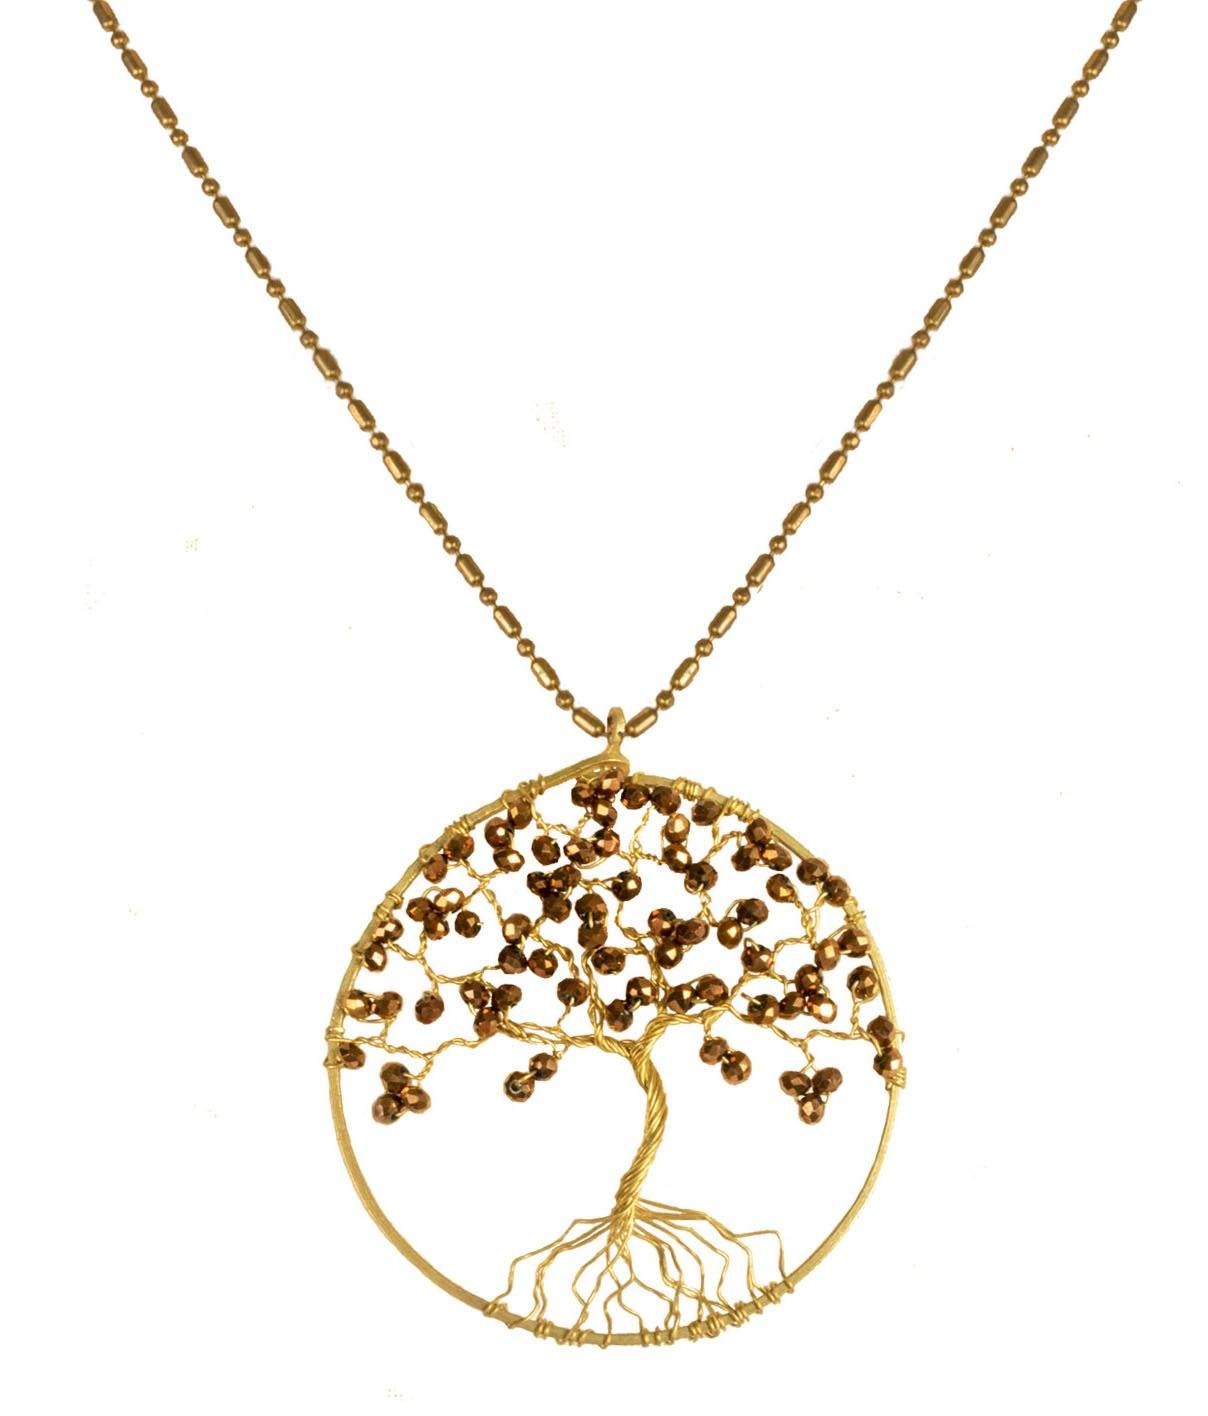 Handmade Necklace Tree of Life Brass with Bead, Crystal and Stone - CCCollections